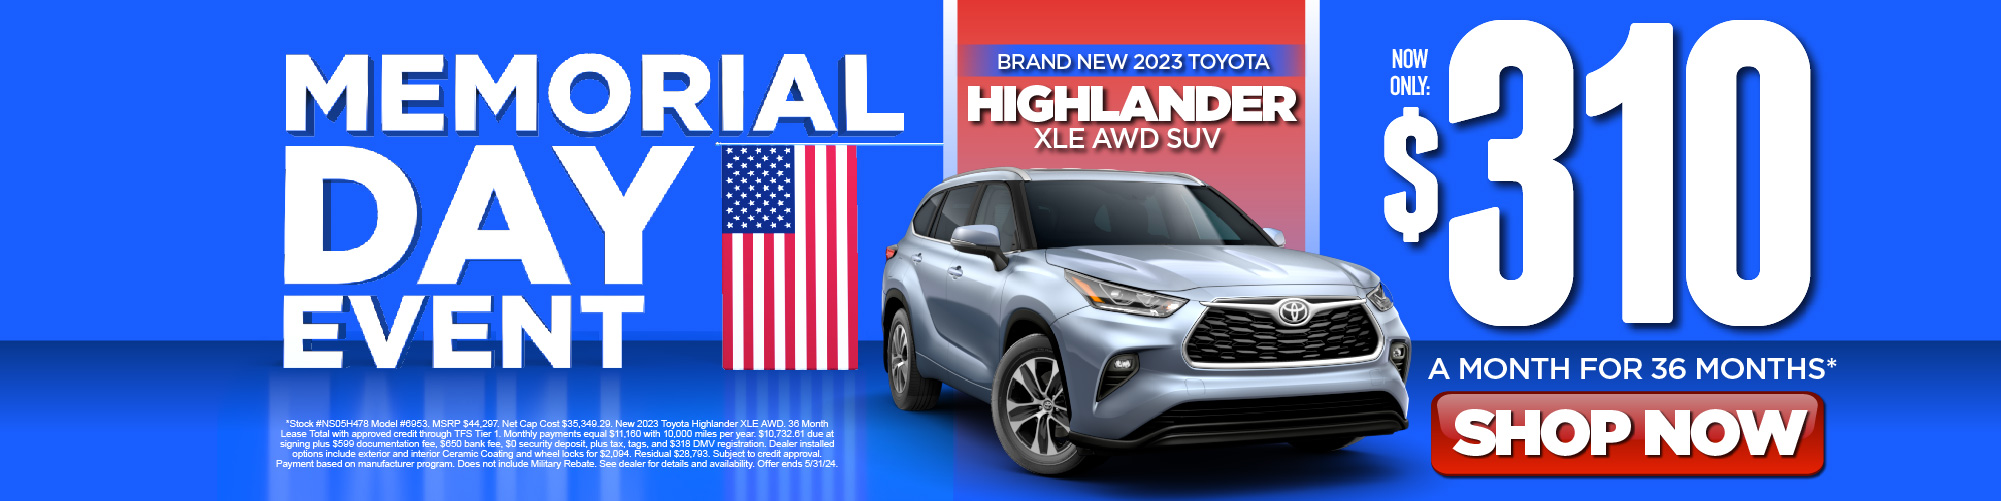 Brand New 2022 Toyota RAV4 LE AWD SUV | Now Only: $186 a month for 36 Months* Act Now.